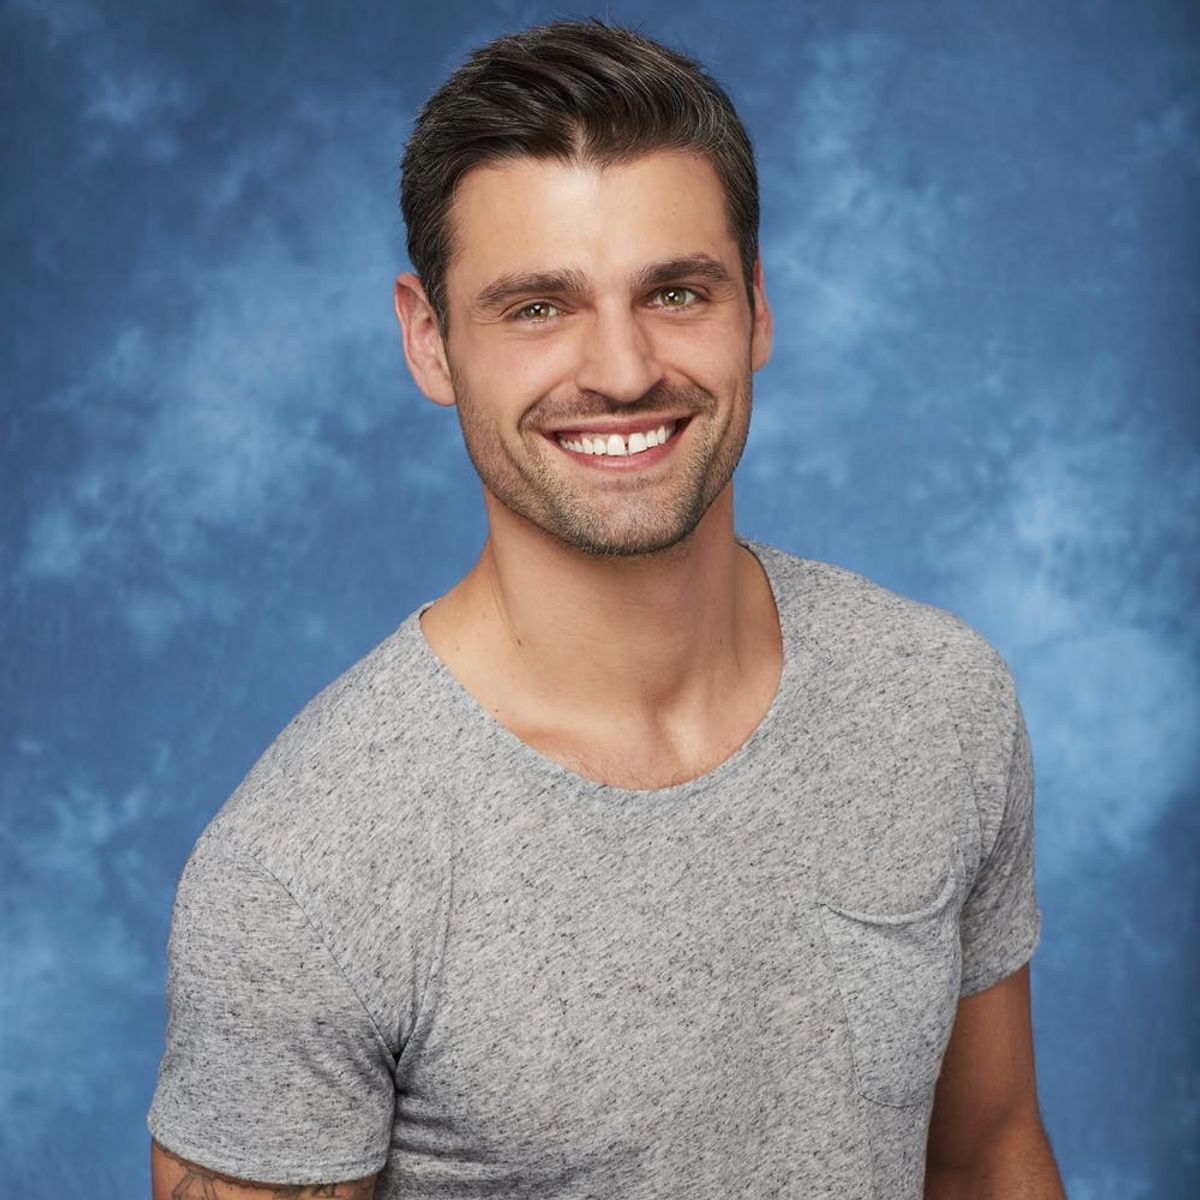 The Bachelorette’s Peter Kraus Hints at Regrets in Cryptic Tweet